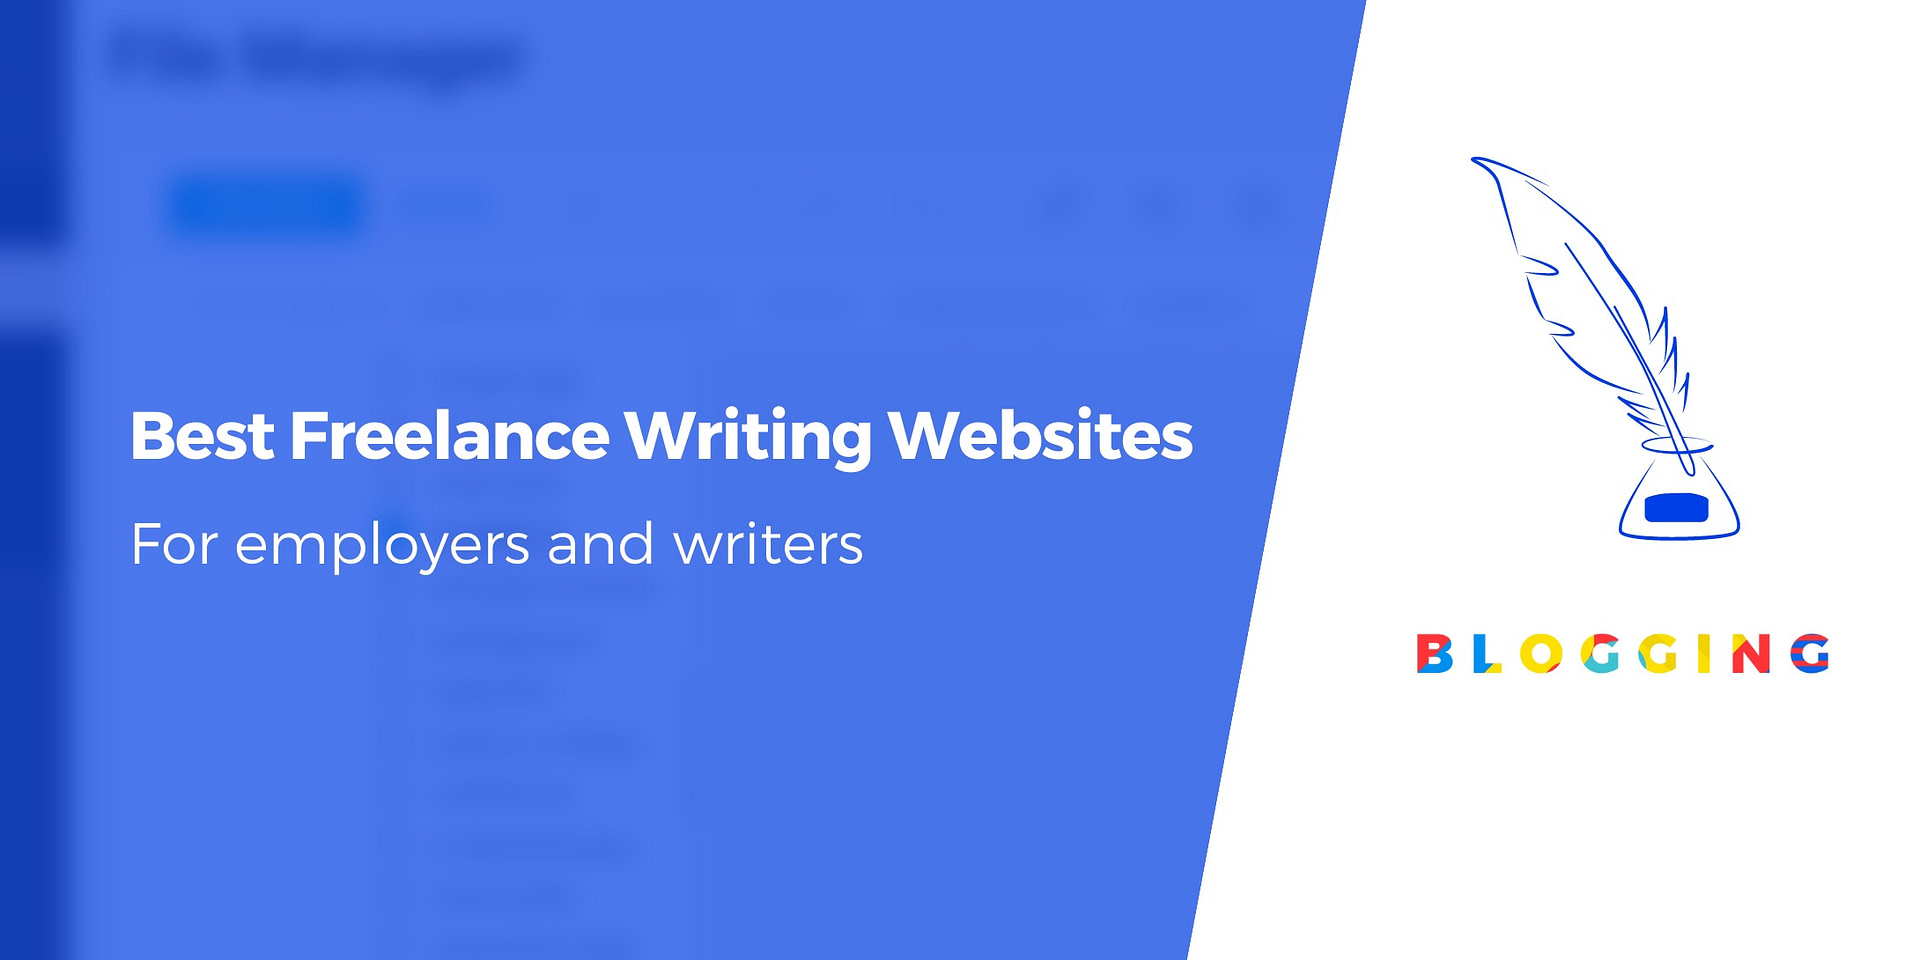 websites for freelance content writing